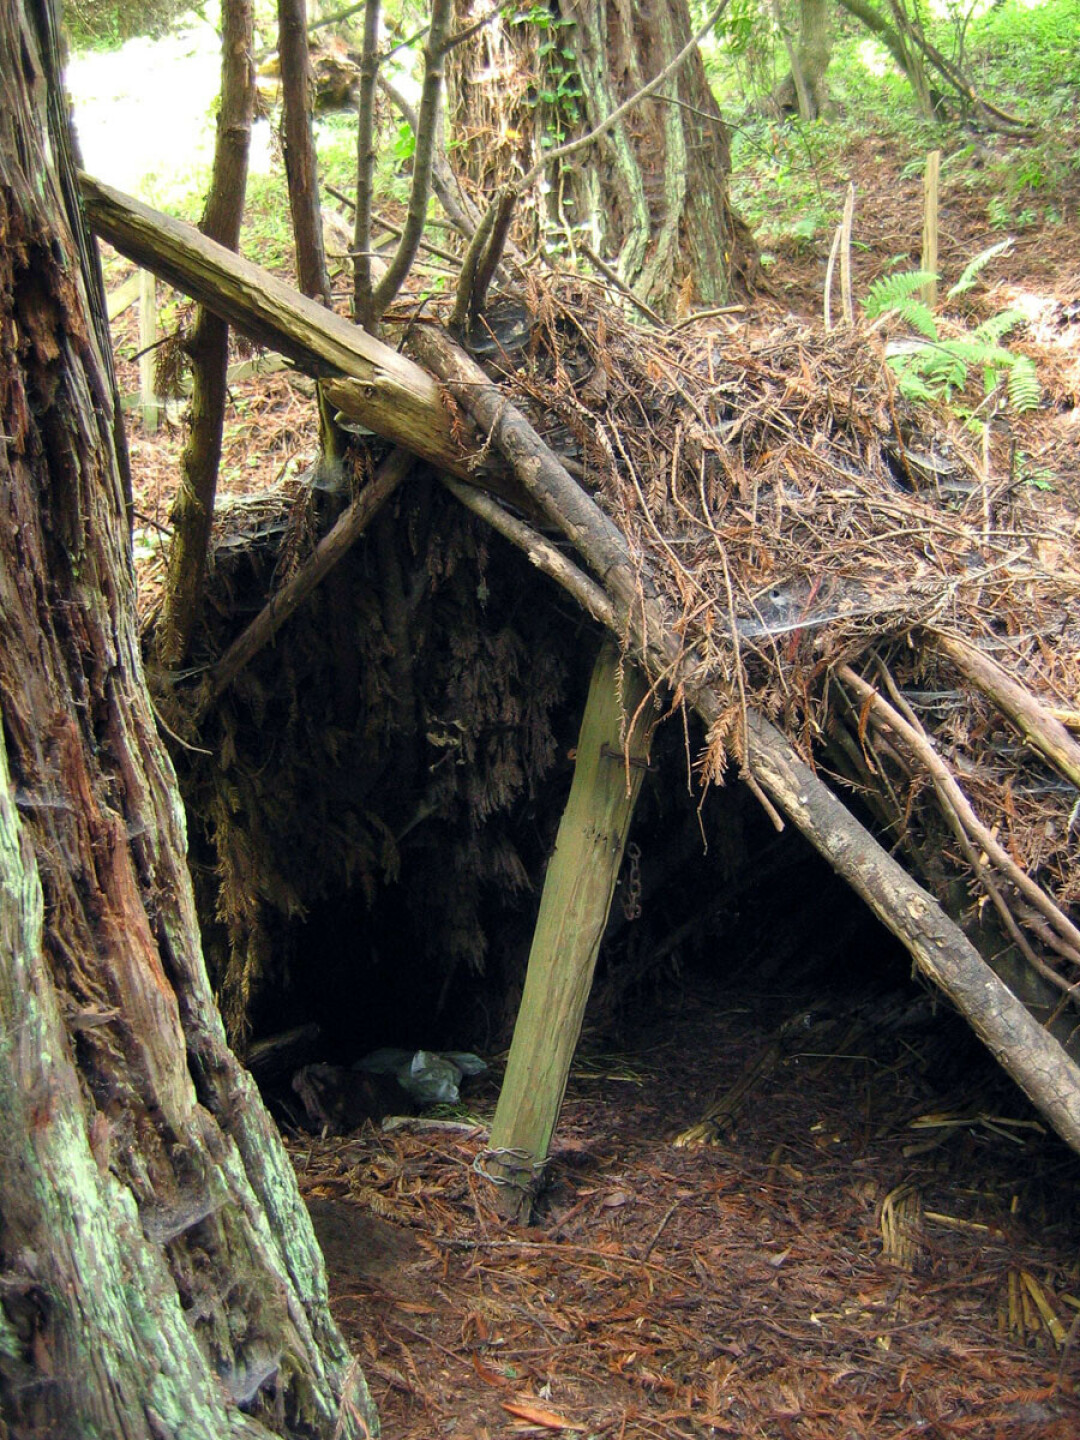 A simple lean-to shelter. (Photo by Erik Fitzpatrick | CC BY 2.0)